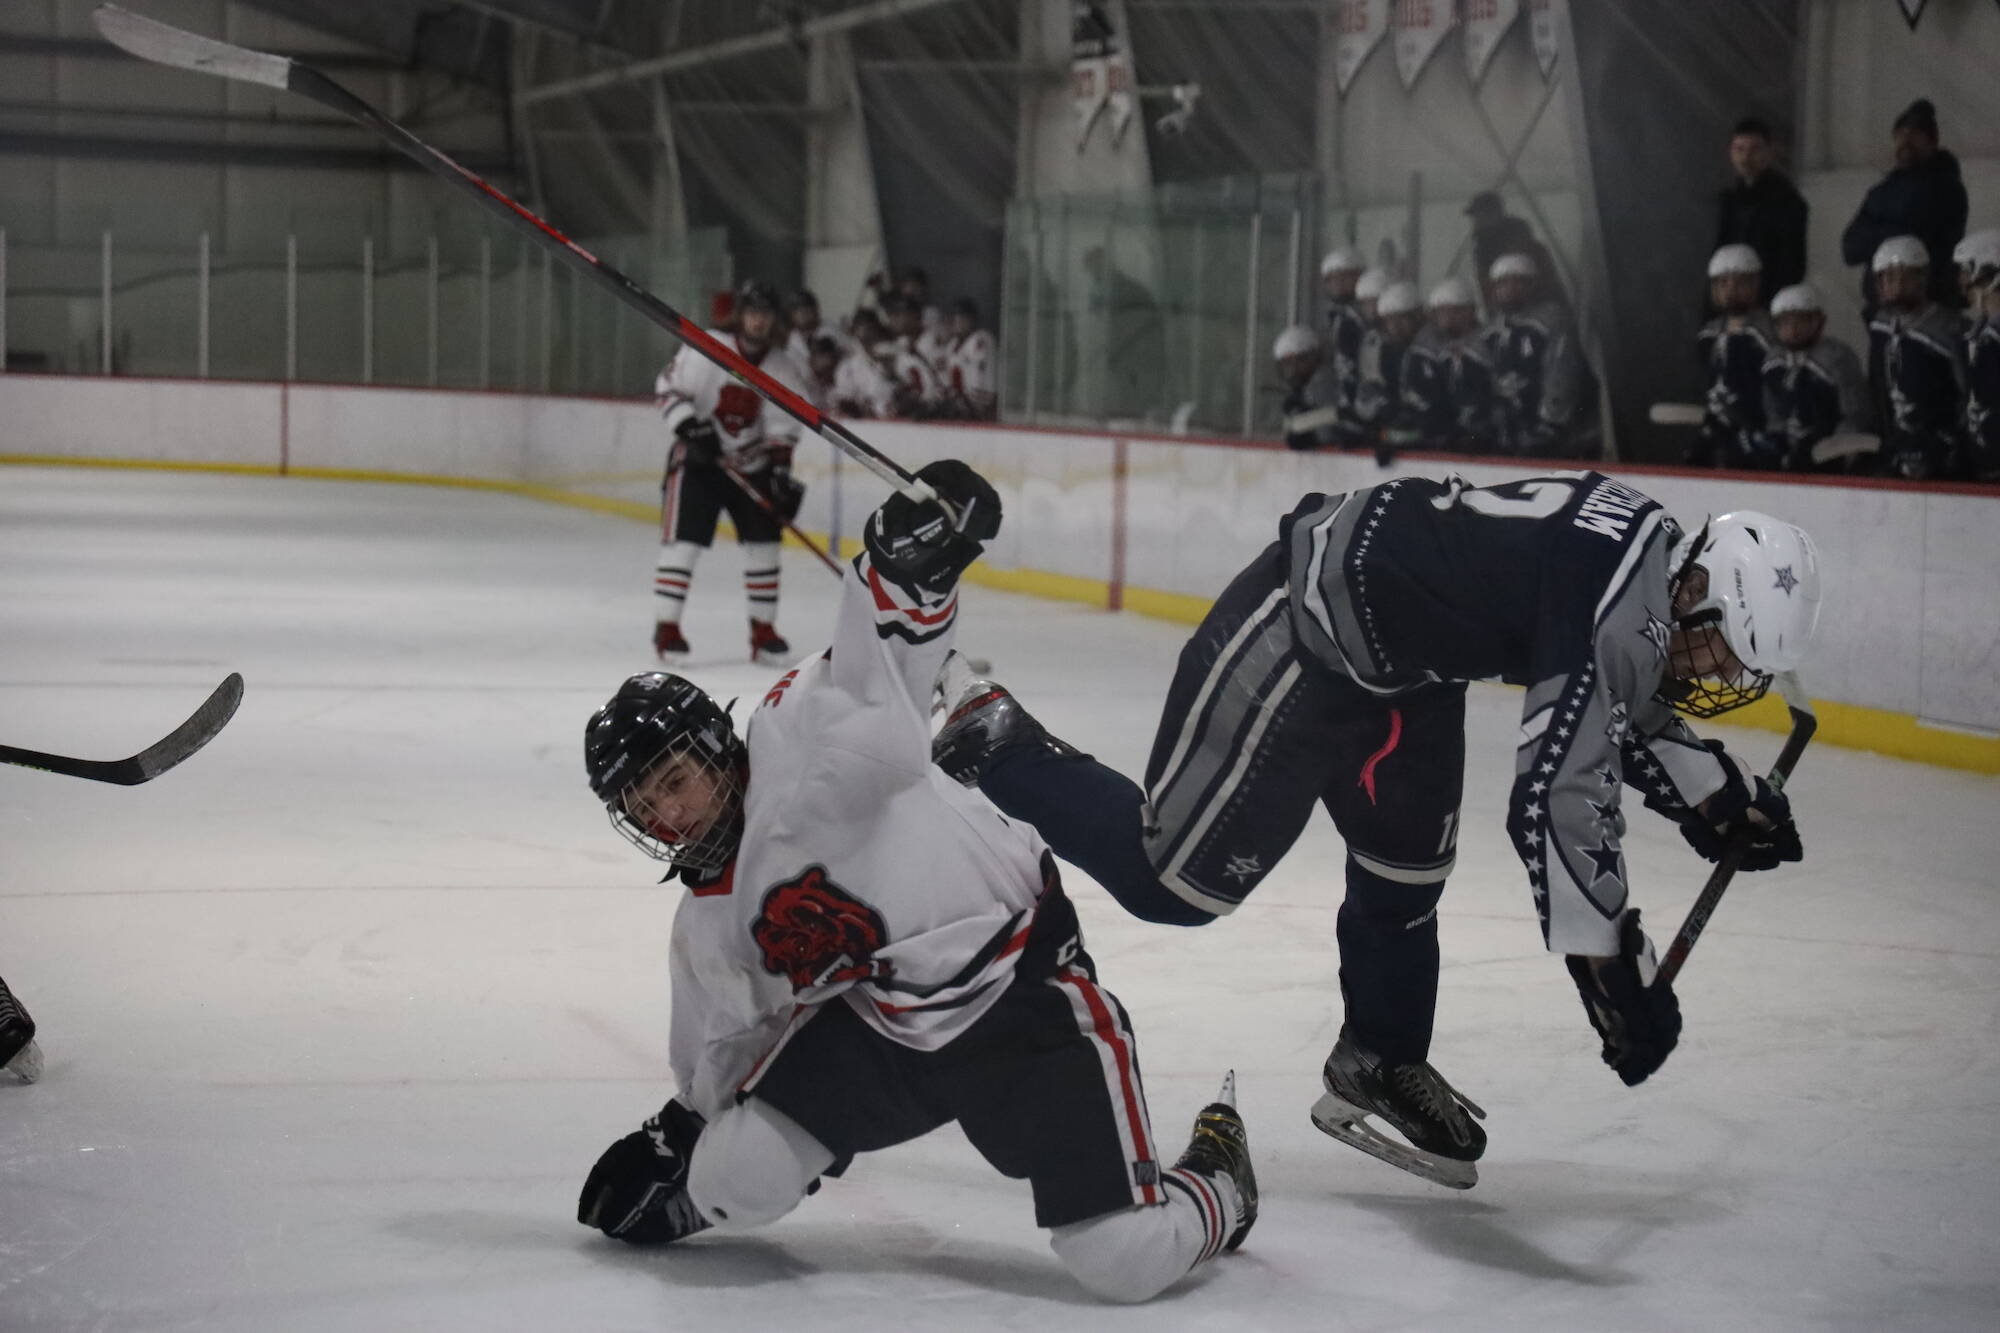 Players from the Juneau-Douglas High School: Yadaa.at Kalé Crimson Bears hockey team and the Soldotna High School Stars take tumble during the third period of their game Saturday afternoon. (Clarise Larson / Juneau Empire)